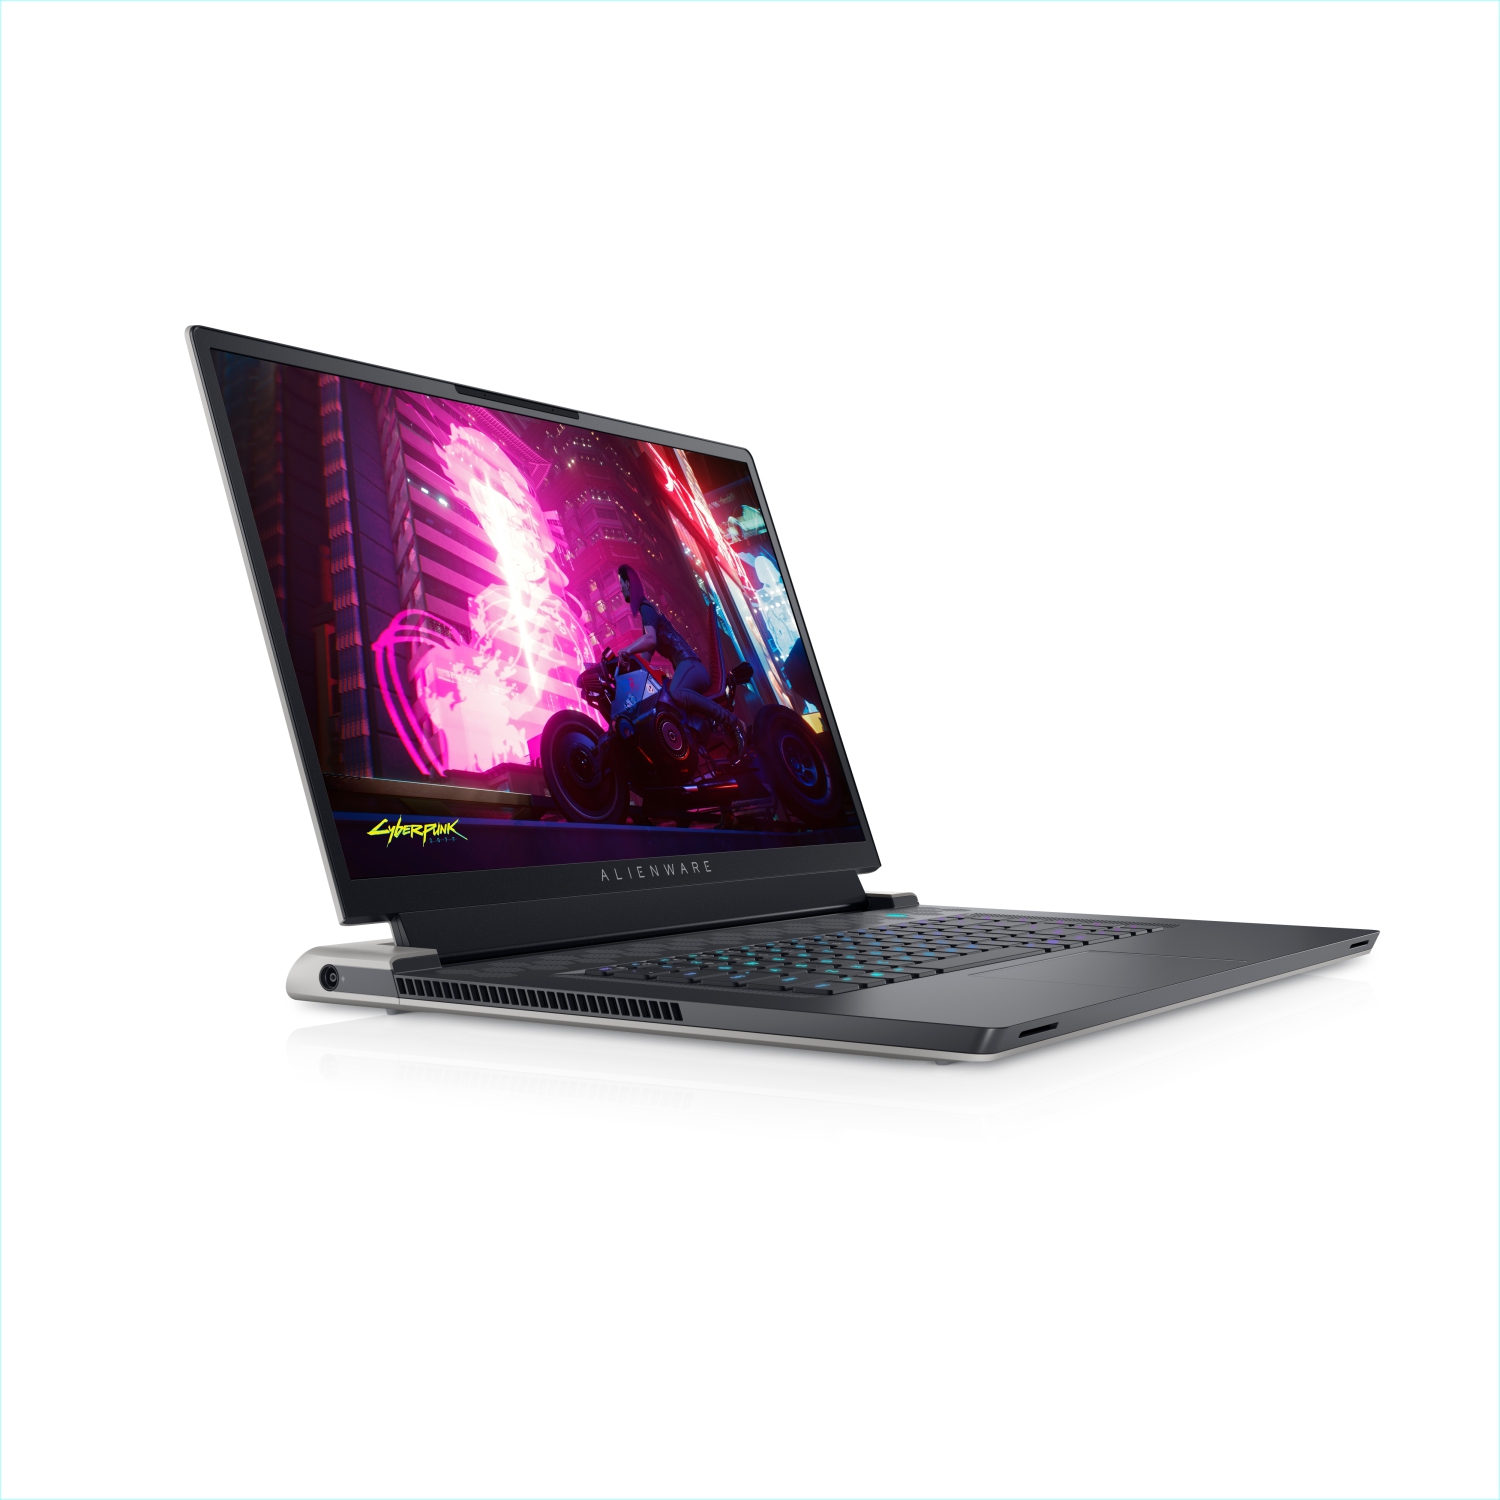 Refurbished (Excellent) - Dell Alienware X17 R1 Gaming Laptop (2021), 17.3" FHD, Core i7, 512GB SSD, 32GB RAM, RTX 3080, 8 Cores @ 4.6 GHz, 11th Gen CPU Certified